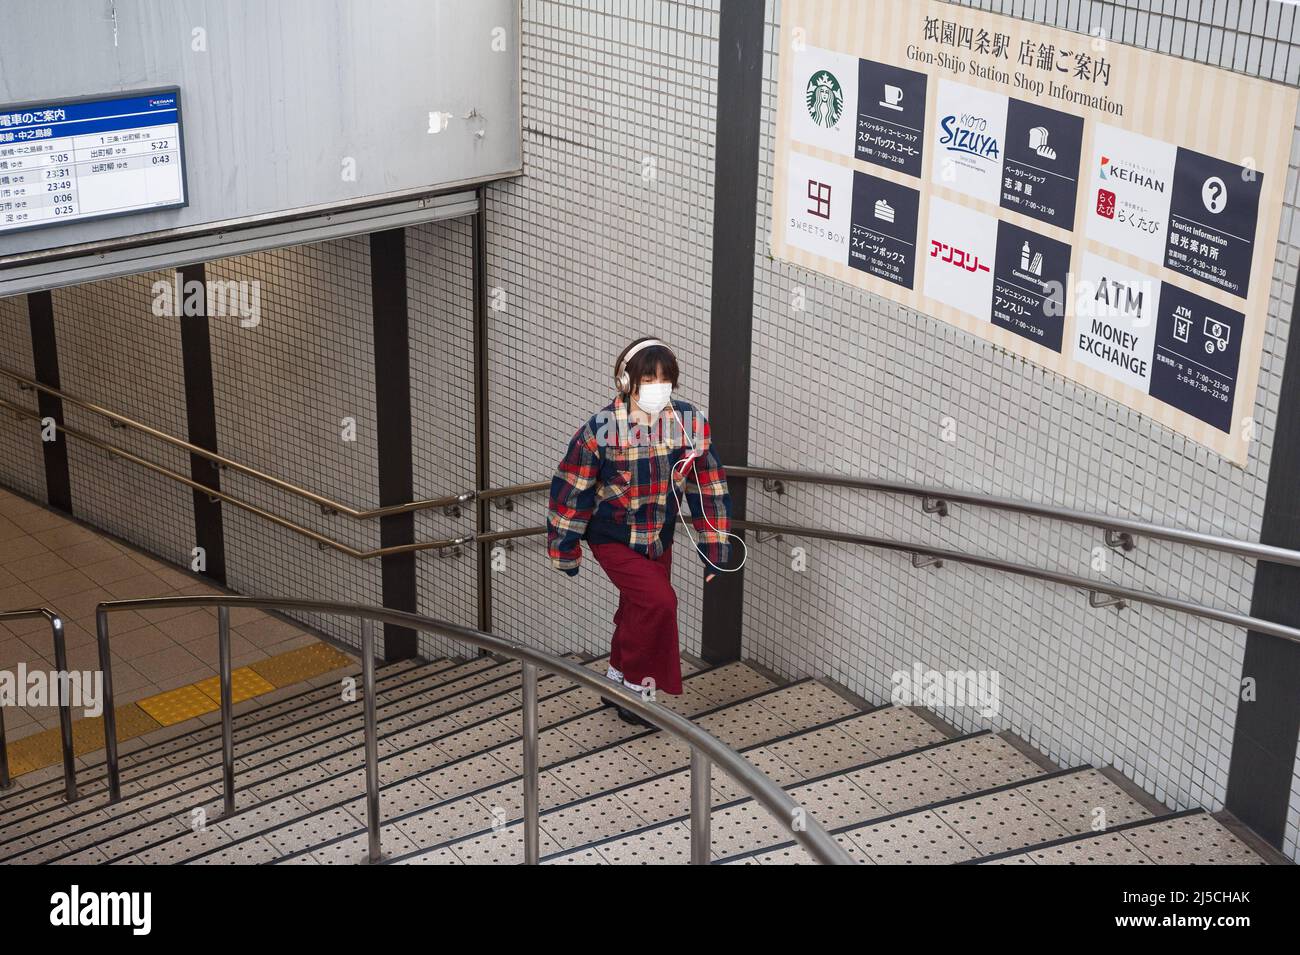 Dec. 23, 2017, Kyoto, Japan, Asia - A young woman wearing a mouth guard and headphones walks up a flight of stairs in a downtown subway station. [automated translation] Stock Photo